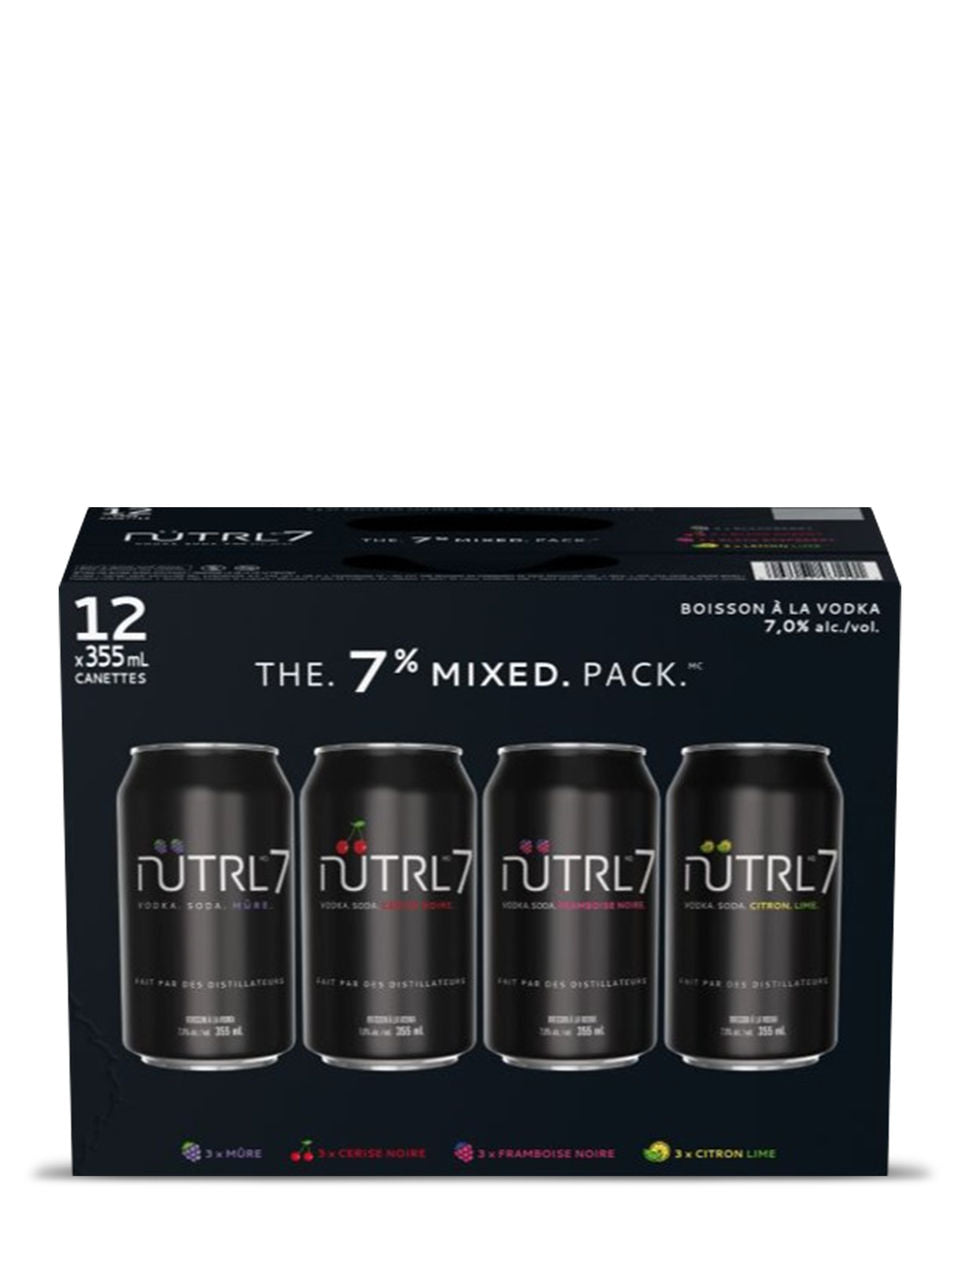 Nutrl 7 Mixed Pack 12 x 355 ml can